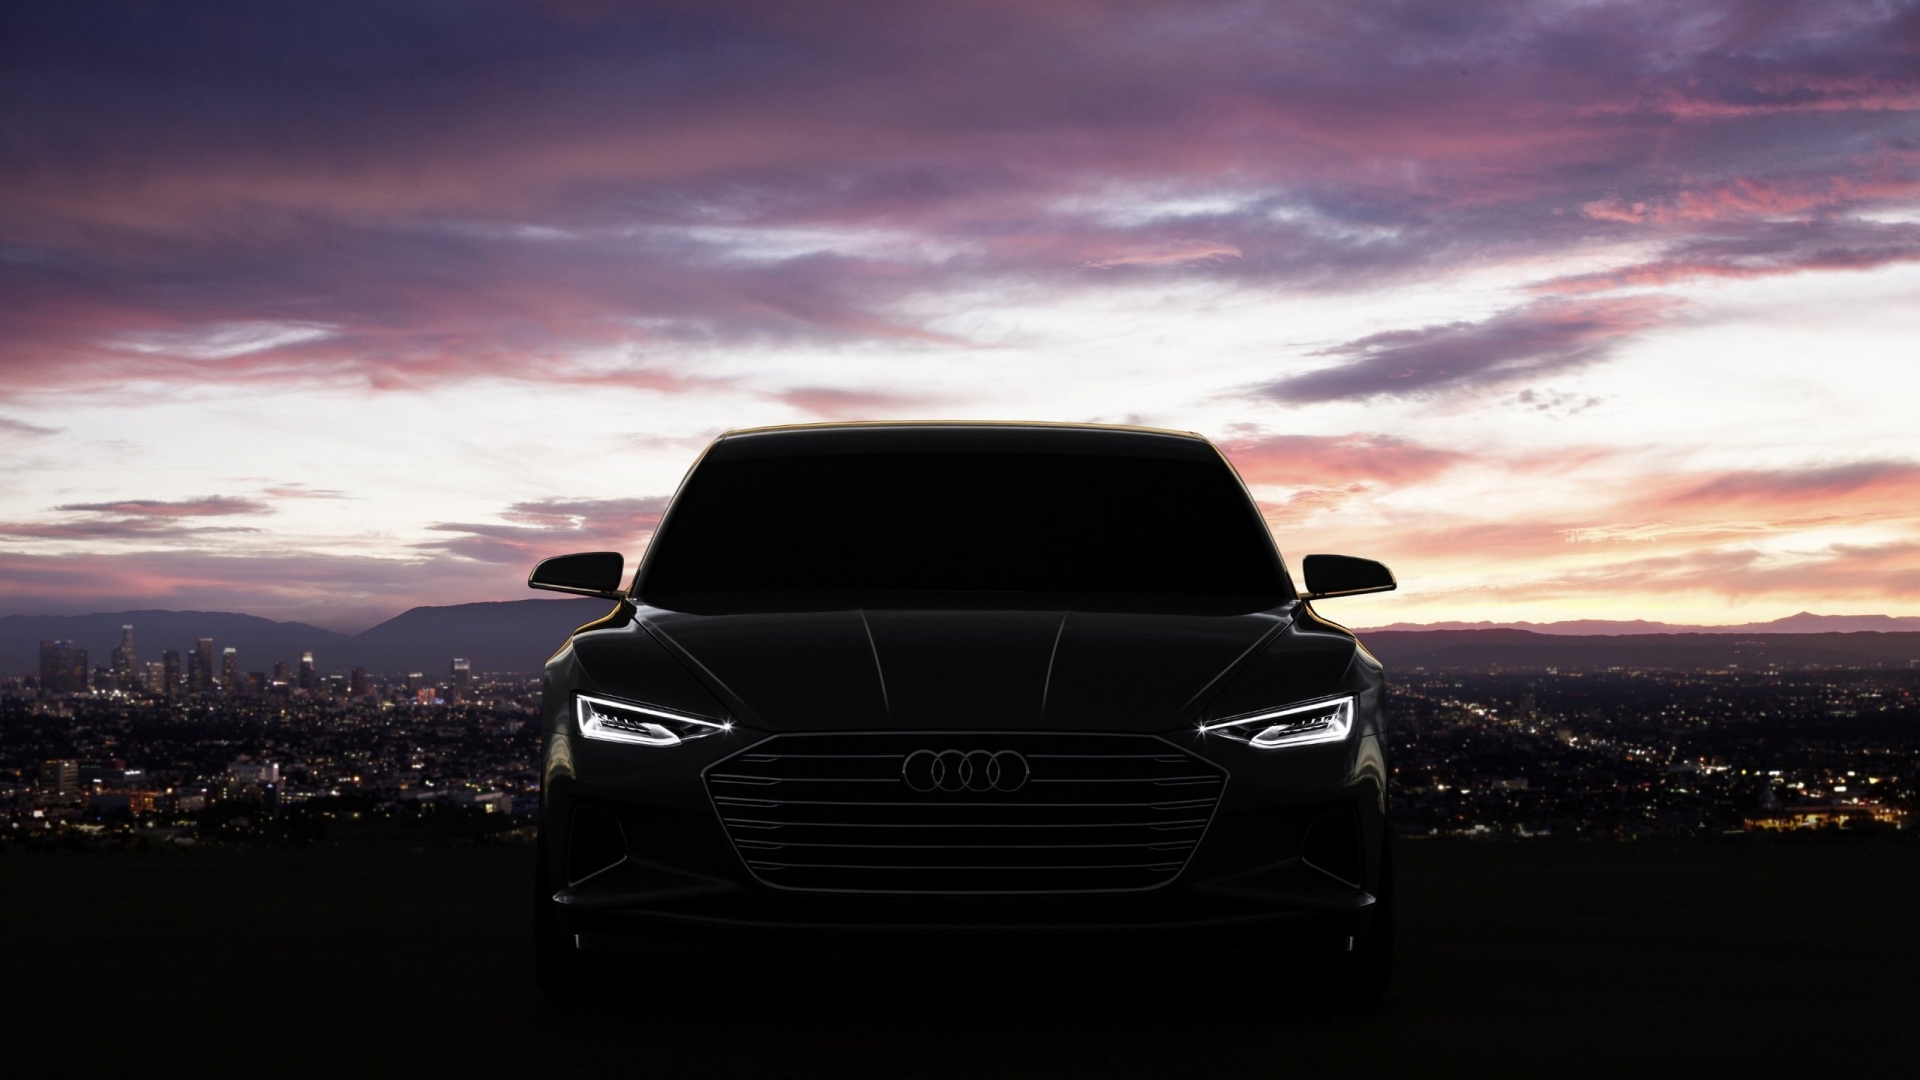 Audi Prologue Concept for 1920 x 1080 HDTV 1080p resolution